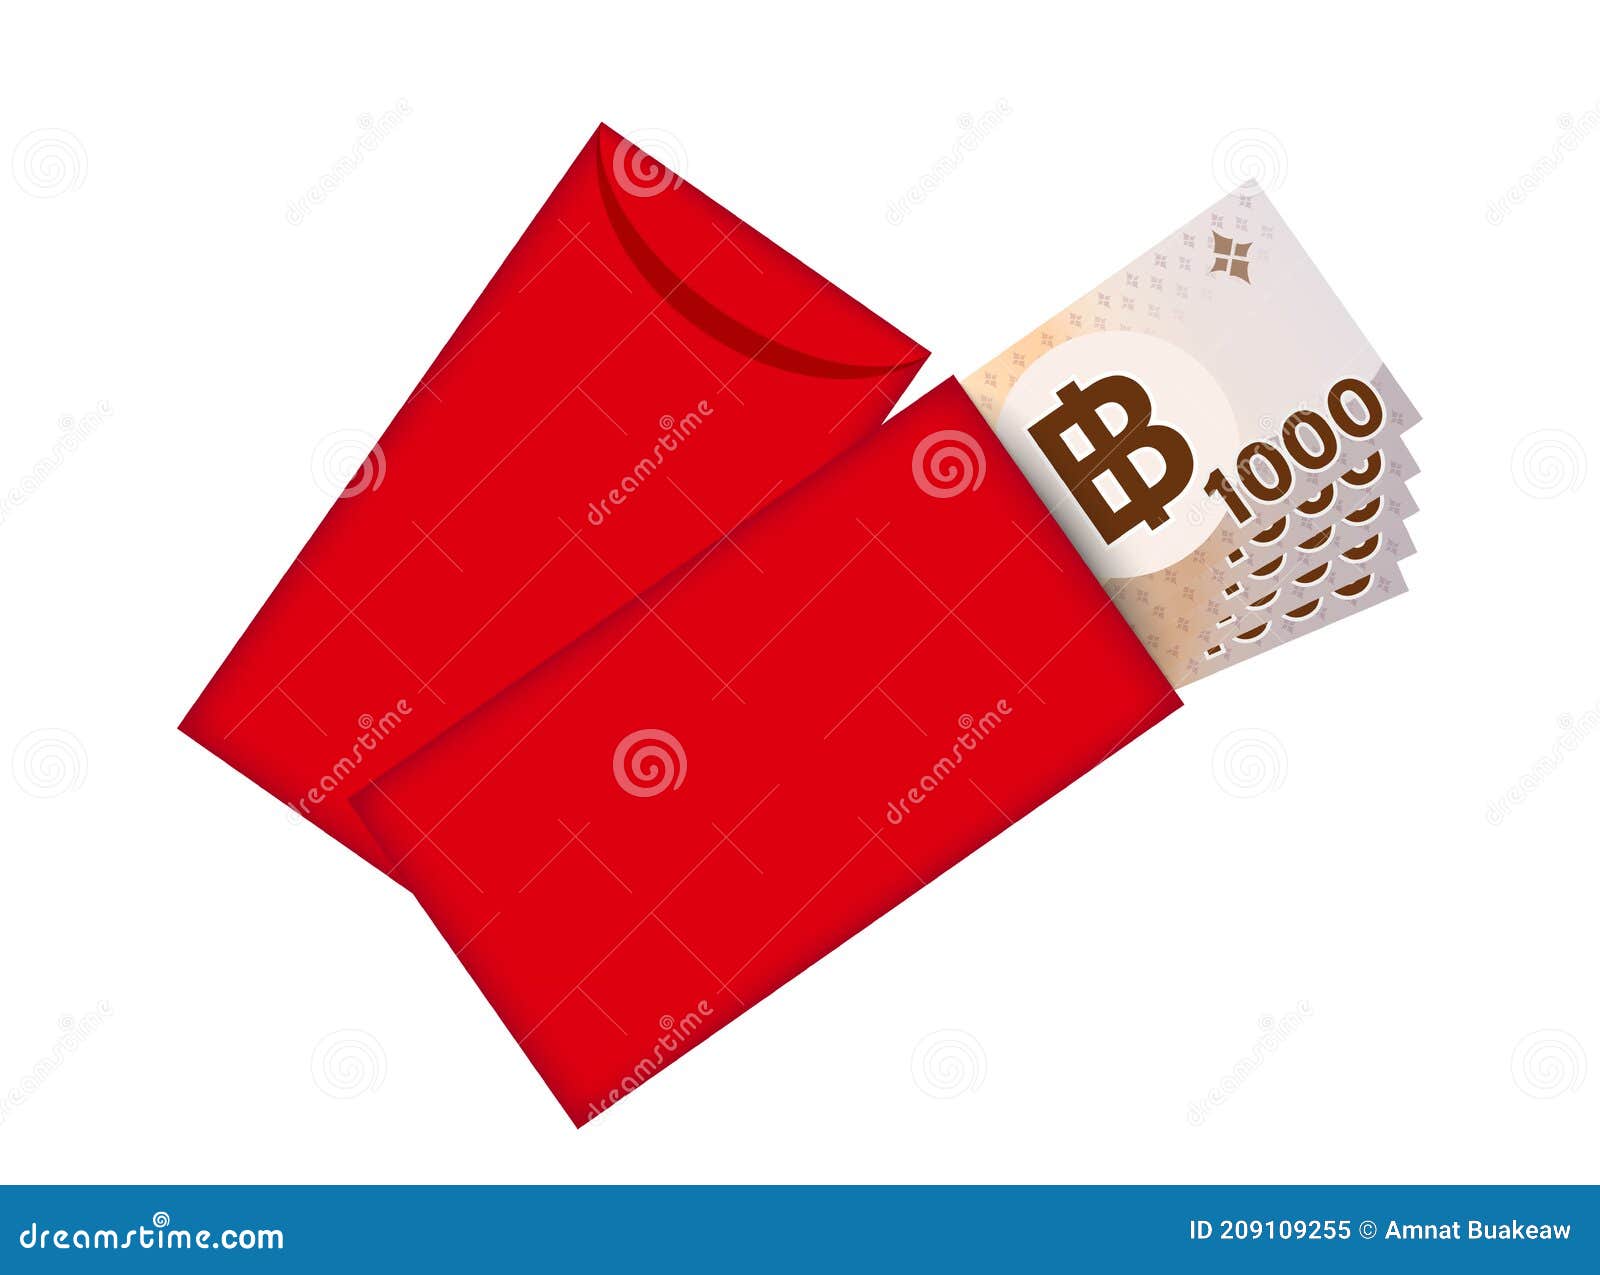 Red Packet and Money Banknote Thai Baht Red Envelope for New Year